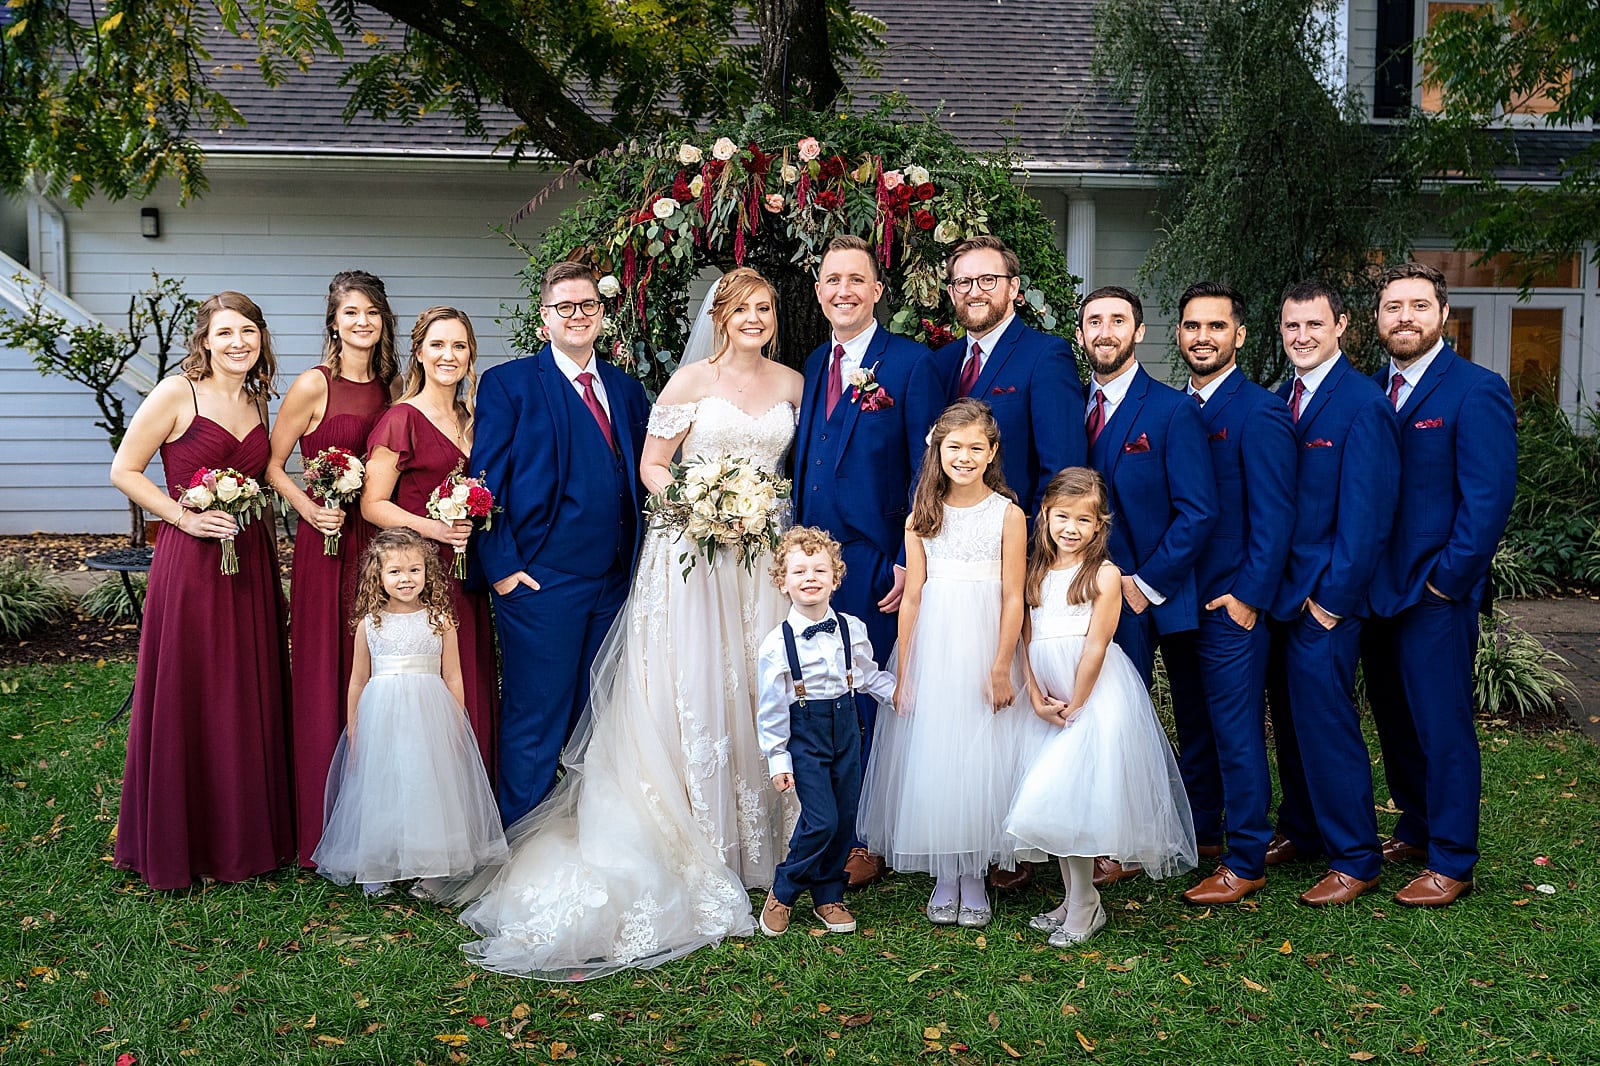 Wedding party style inspiration - blue and merlot